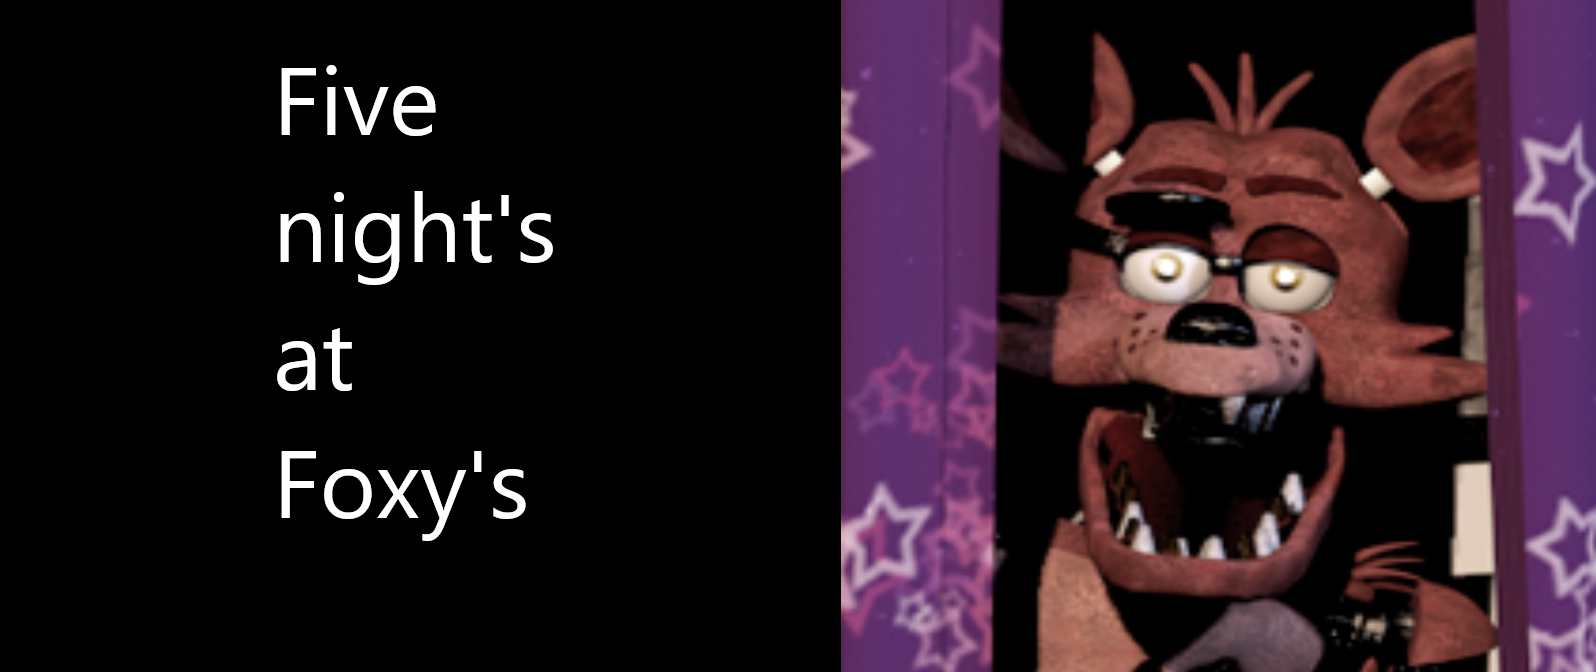 Five night's at Foxy's